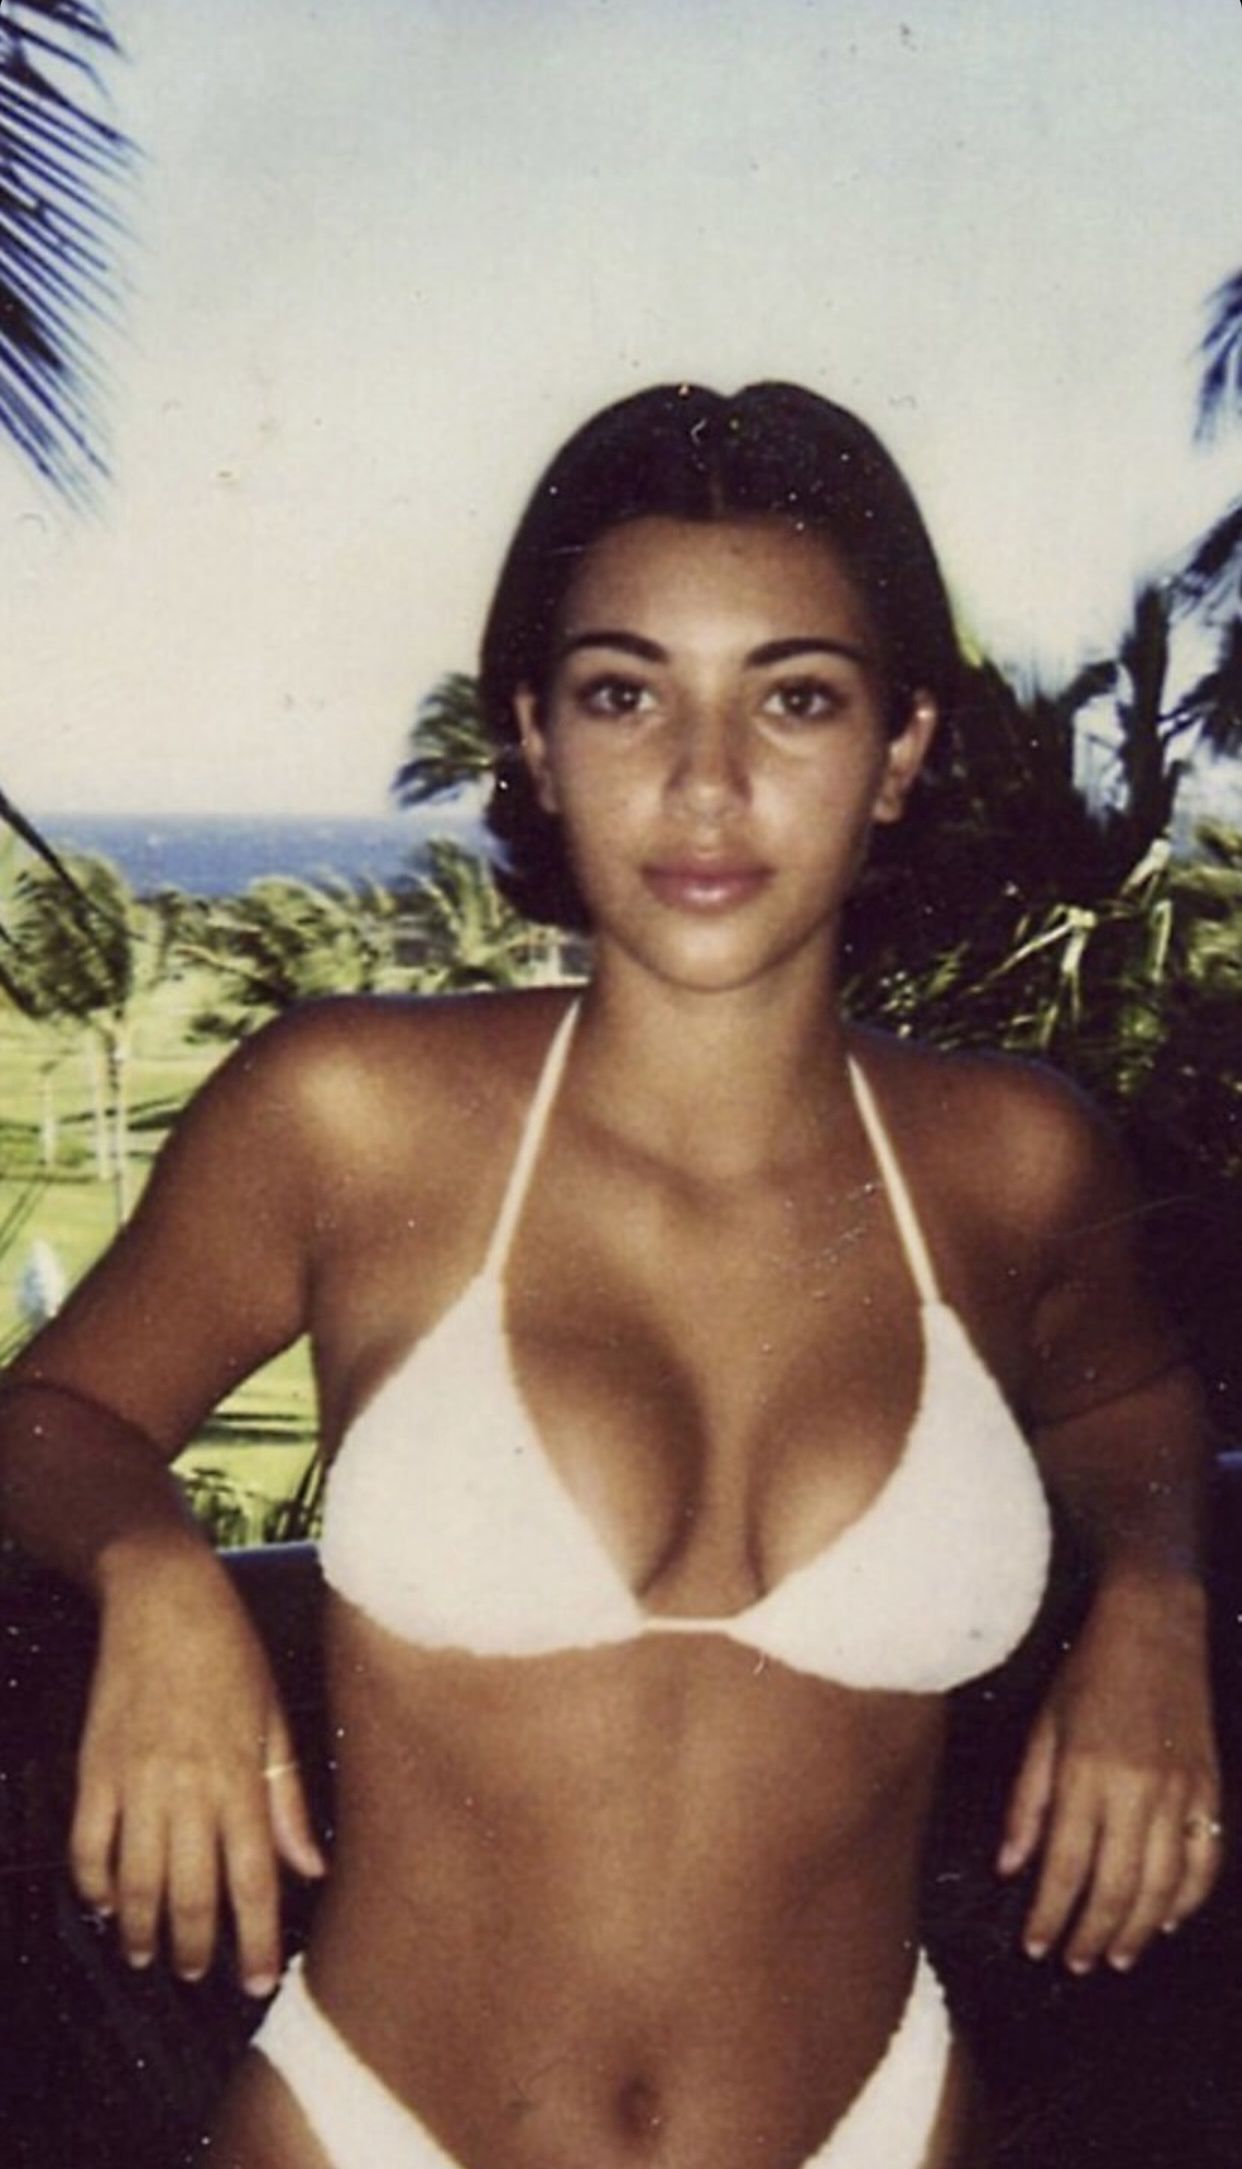 This is how Kim Kardashian looked before the procedures